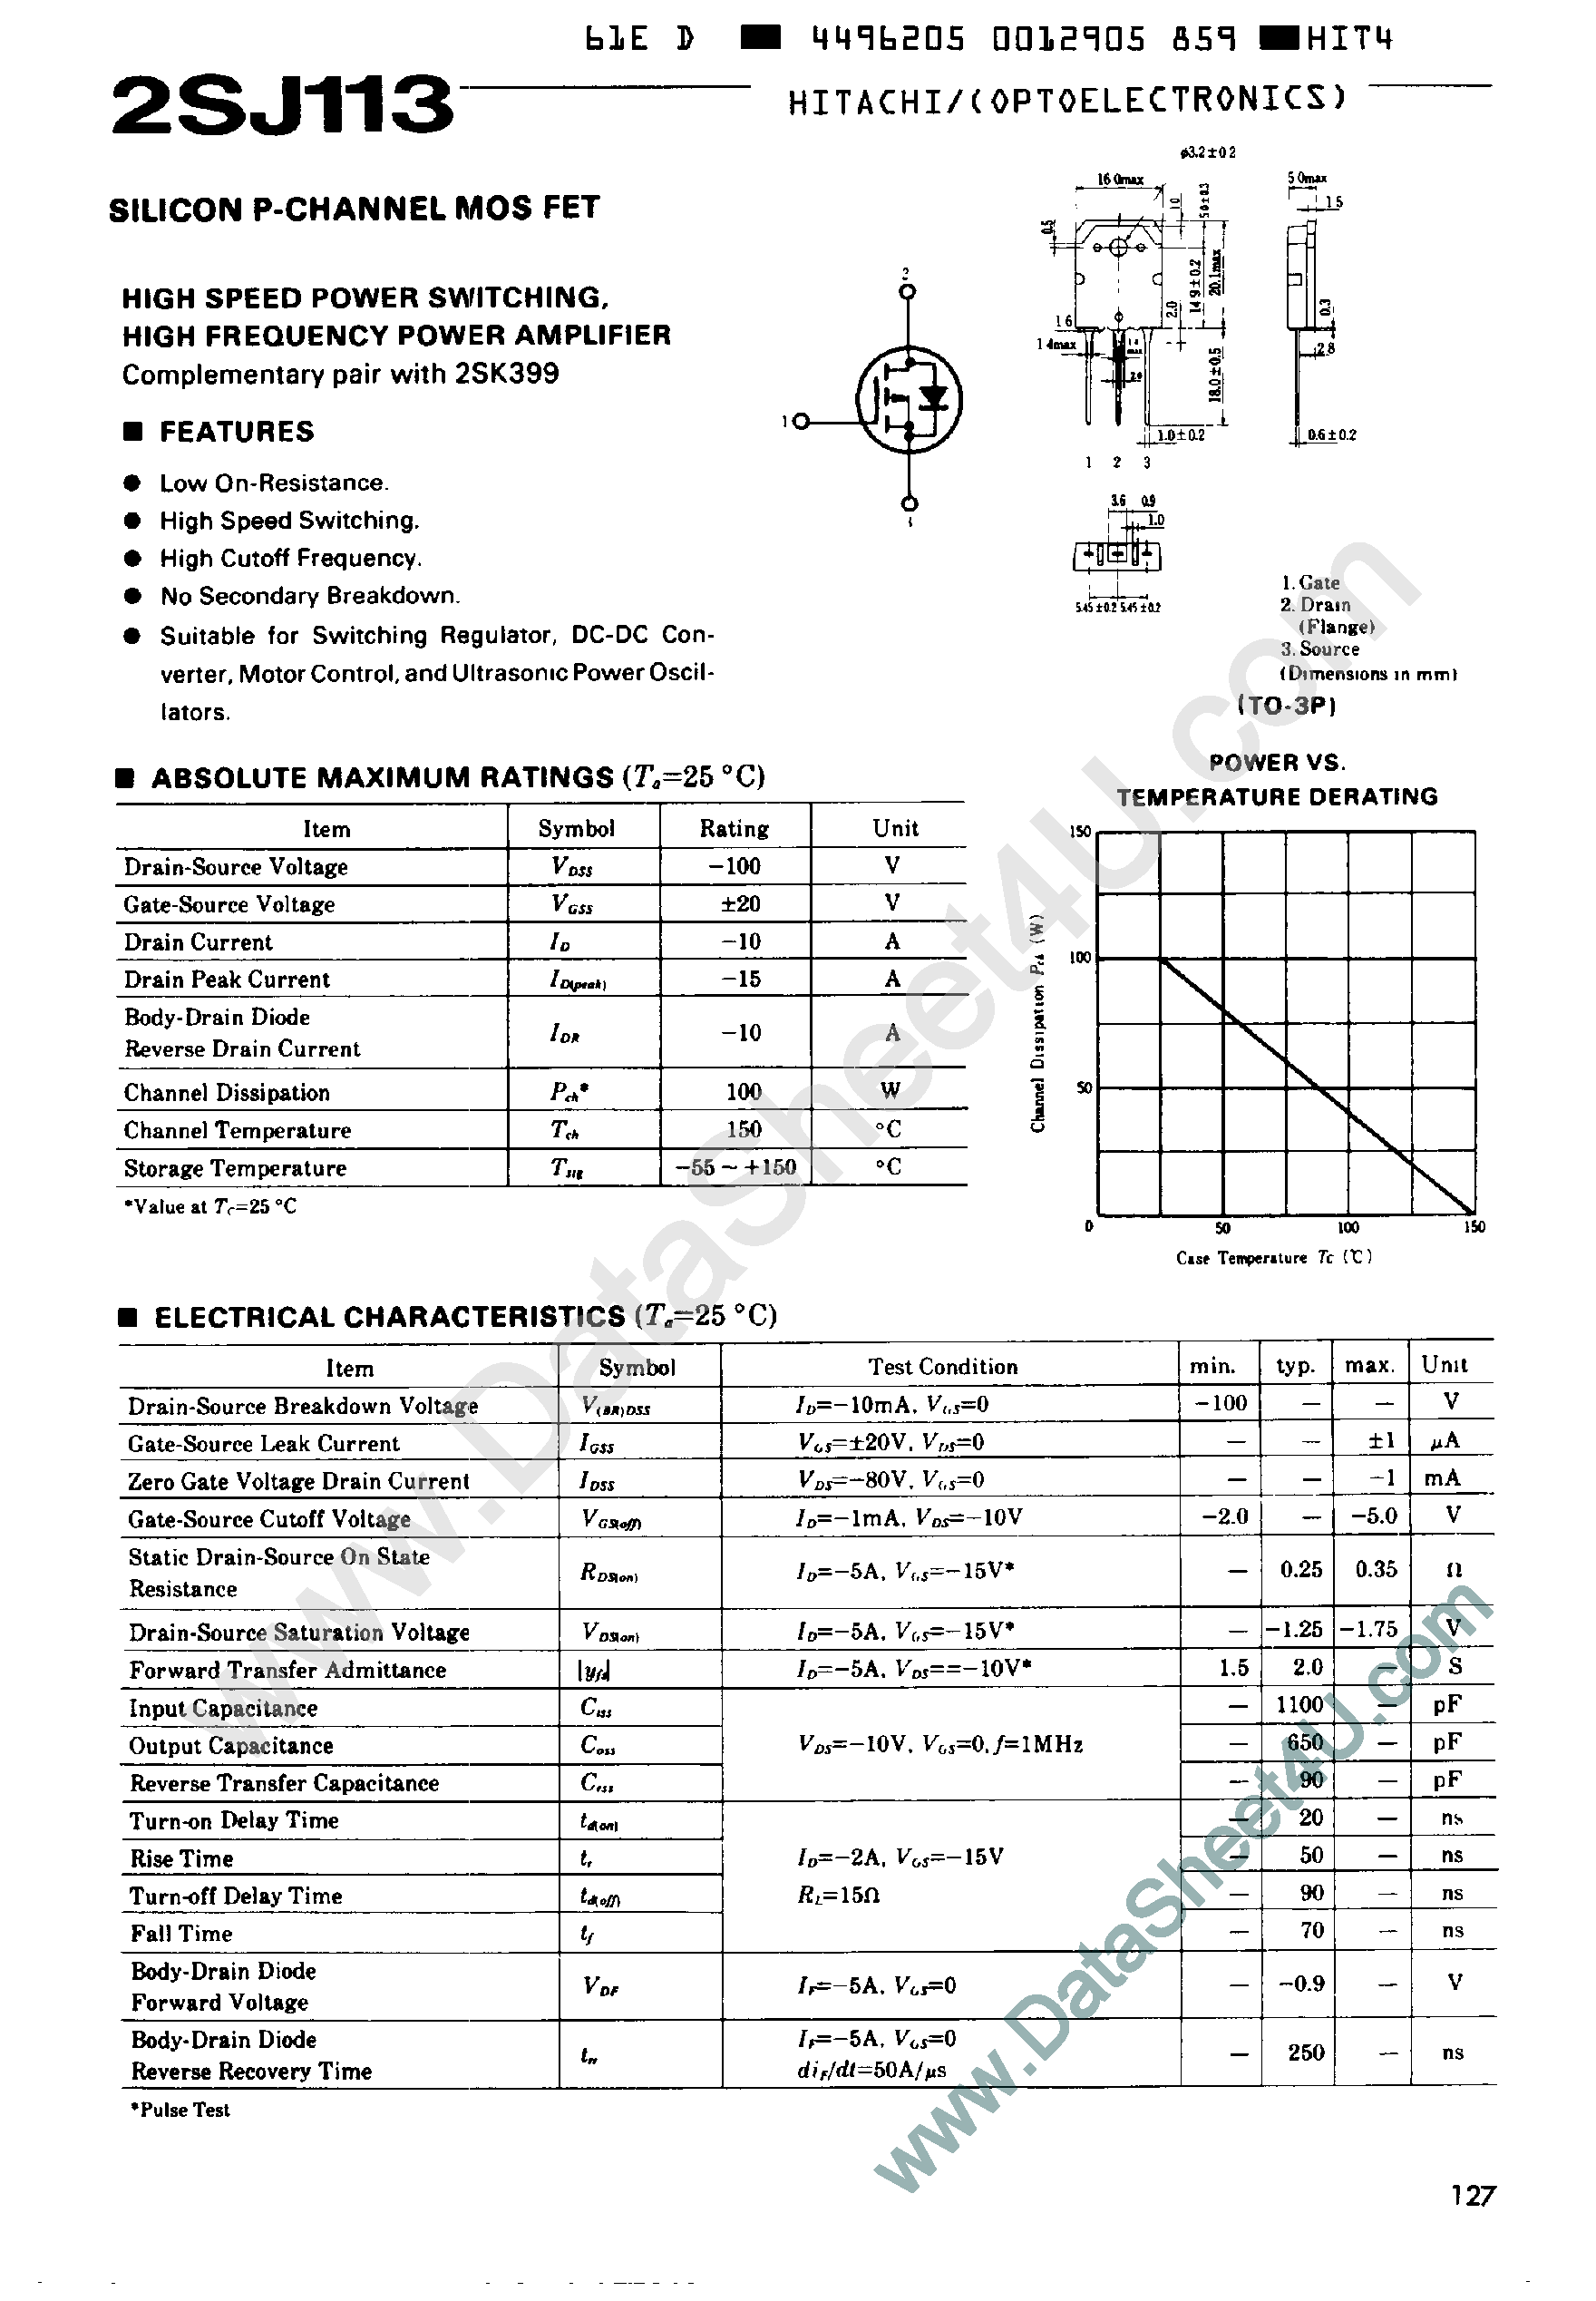 Datasheet 2SJ113 - SILICON P-CHANNEL MOS FET page 1